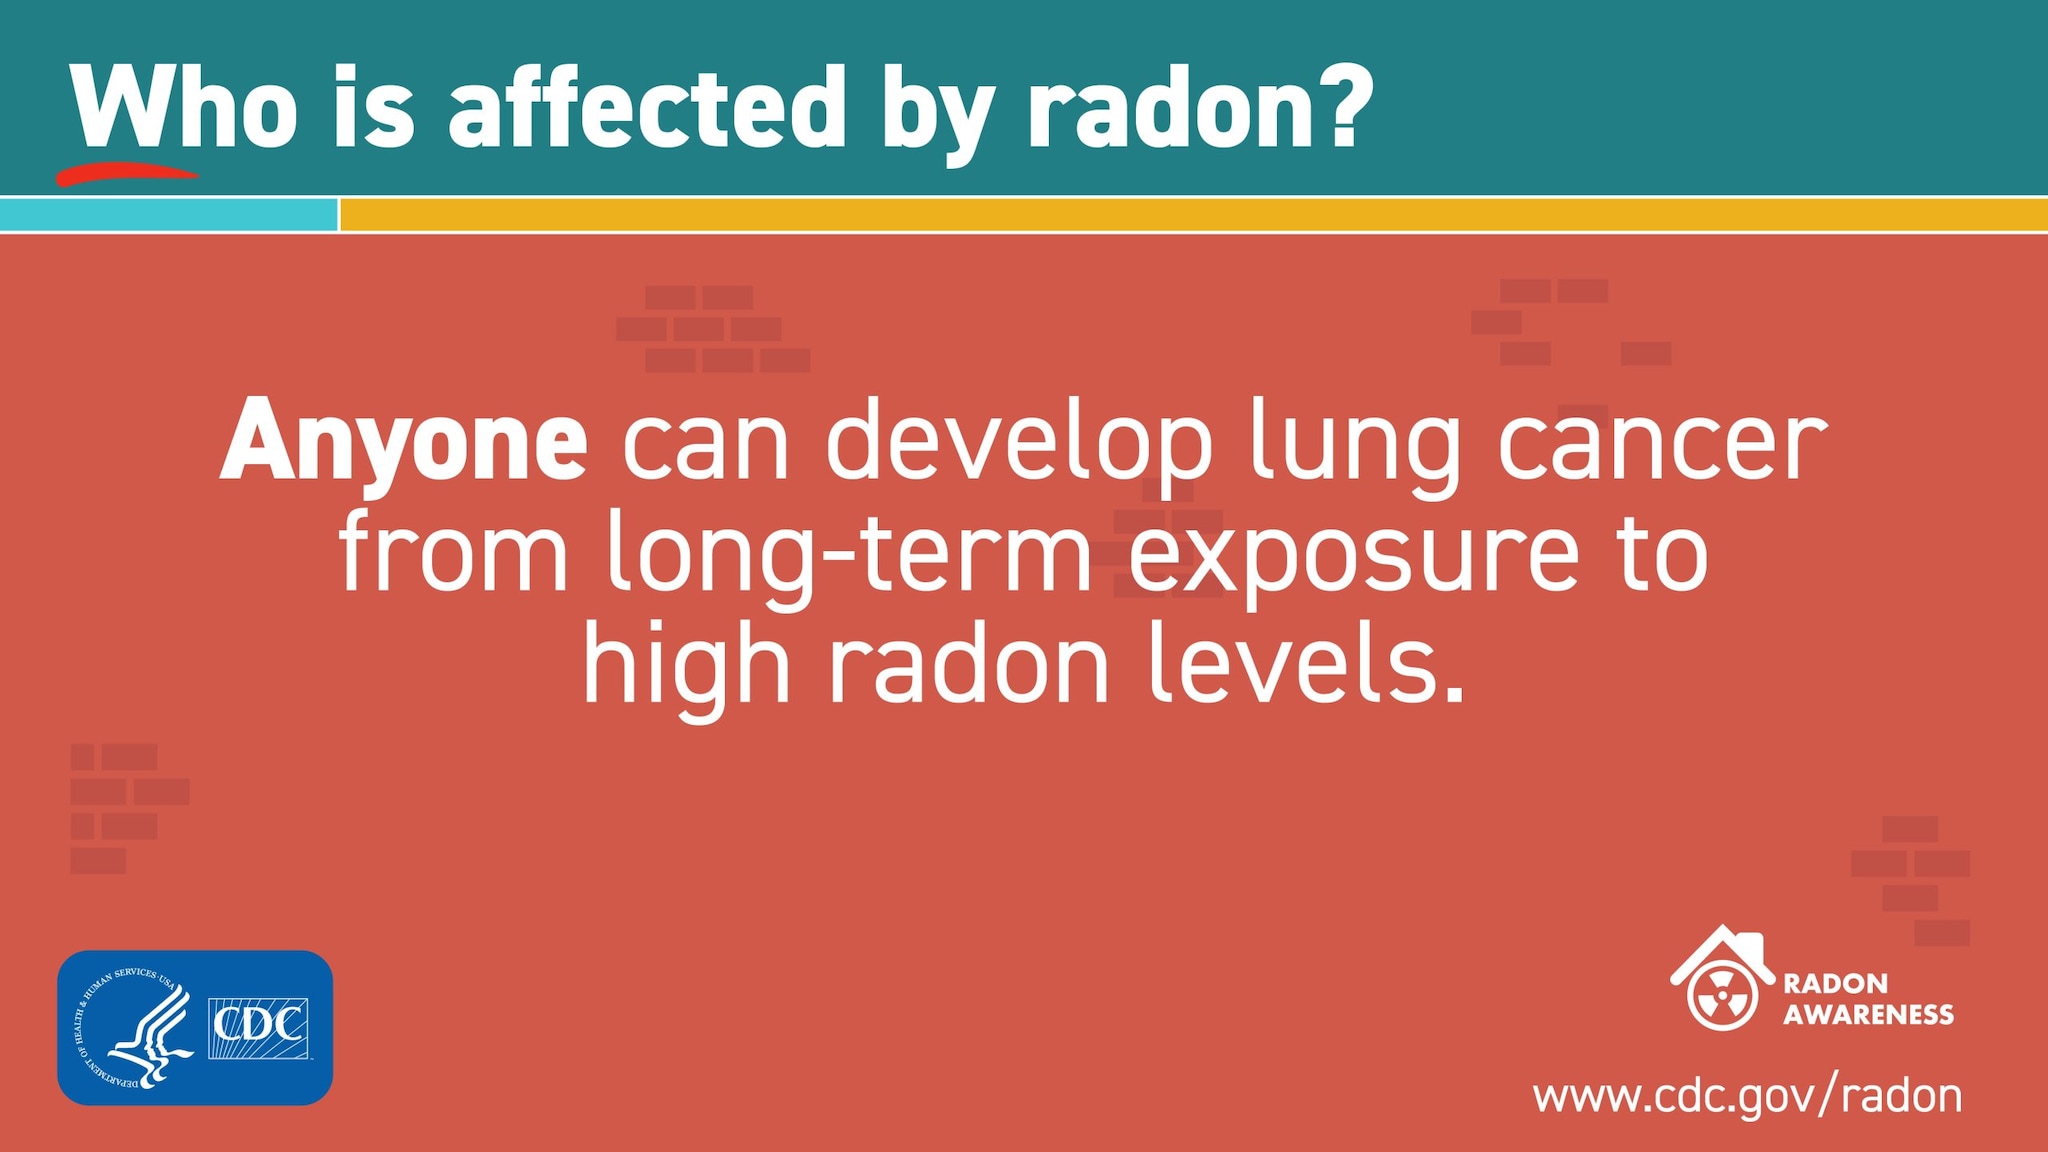 Anyone can develop lung cancer from long-term exposure to high levels of radon.